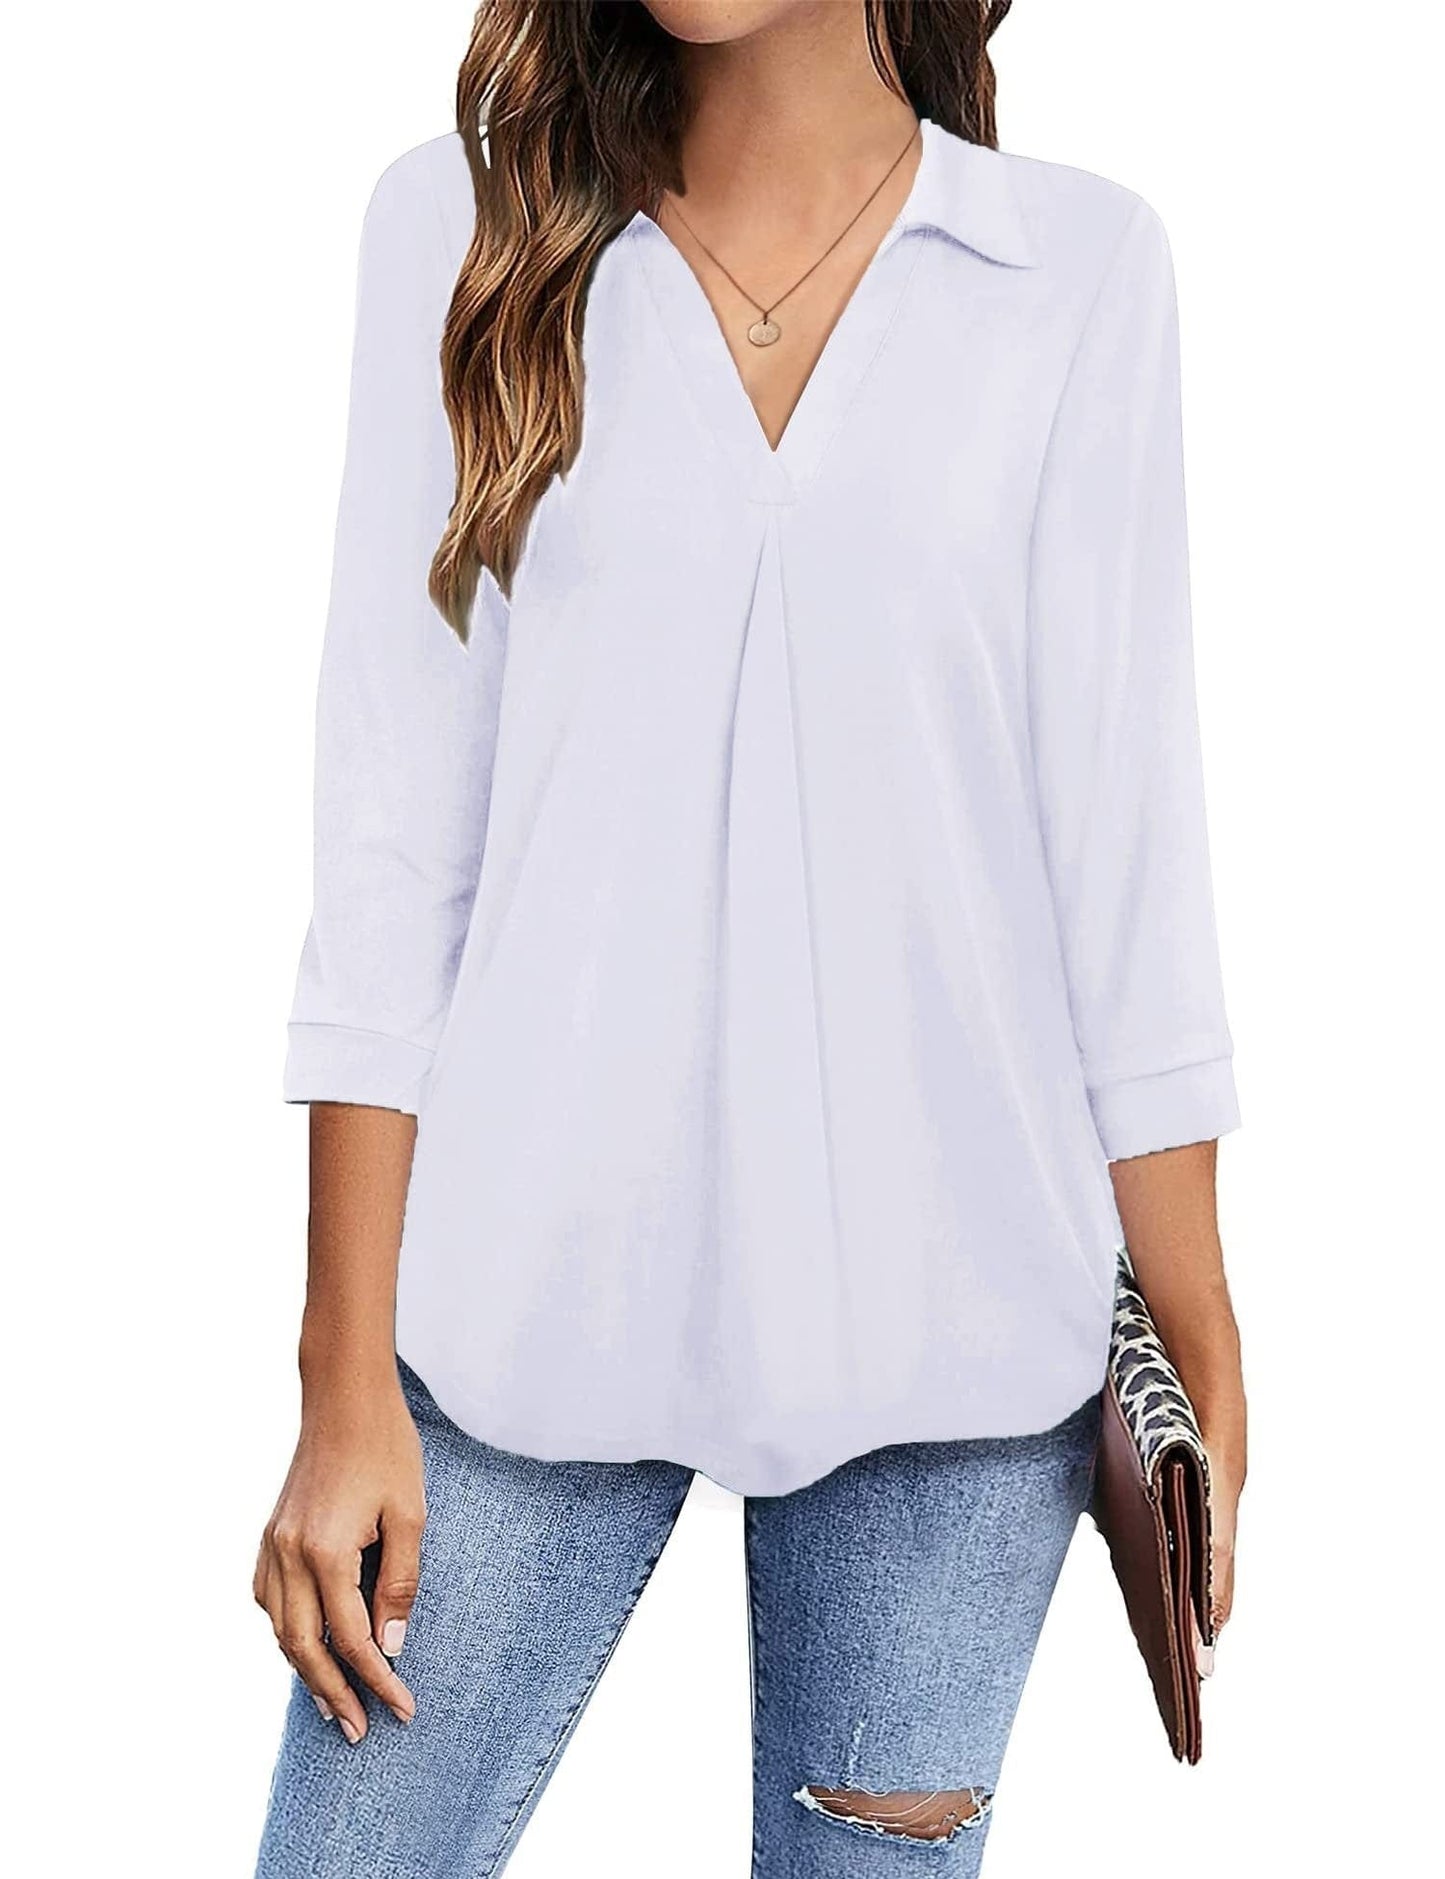 Collared V Neck Casual Loose Blouse BLO2211191918WHIS White / 2 (S)